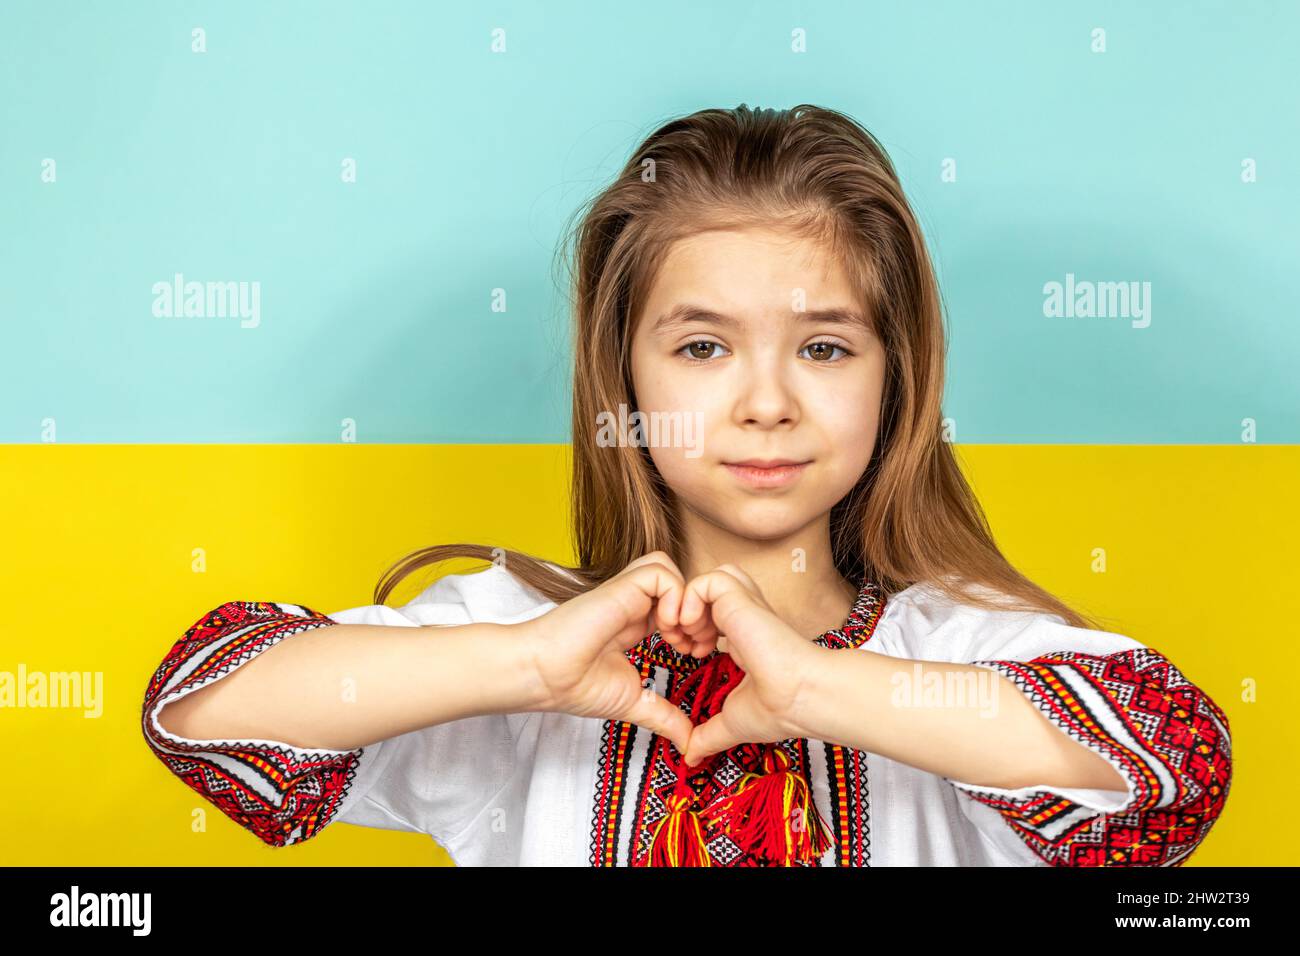 A girl in national Ukrainian clothes, an embroidered shirt, shows a heart sign as a sign of love for Ukraine, close-up against the background of the Stock Photo